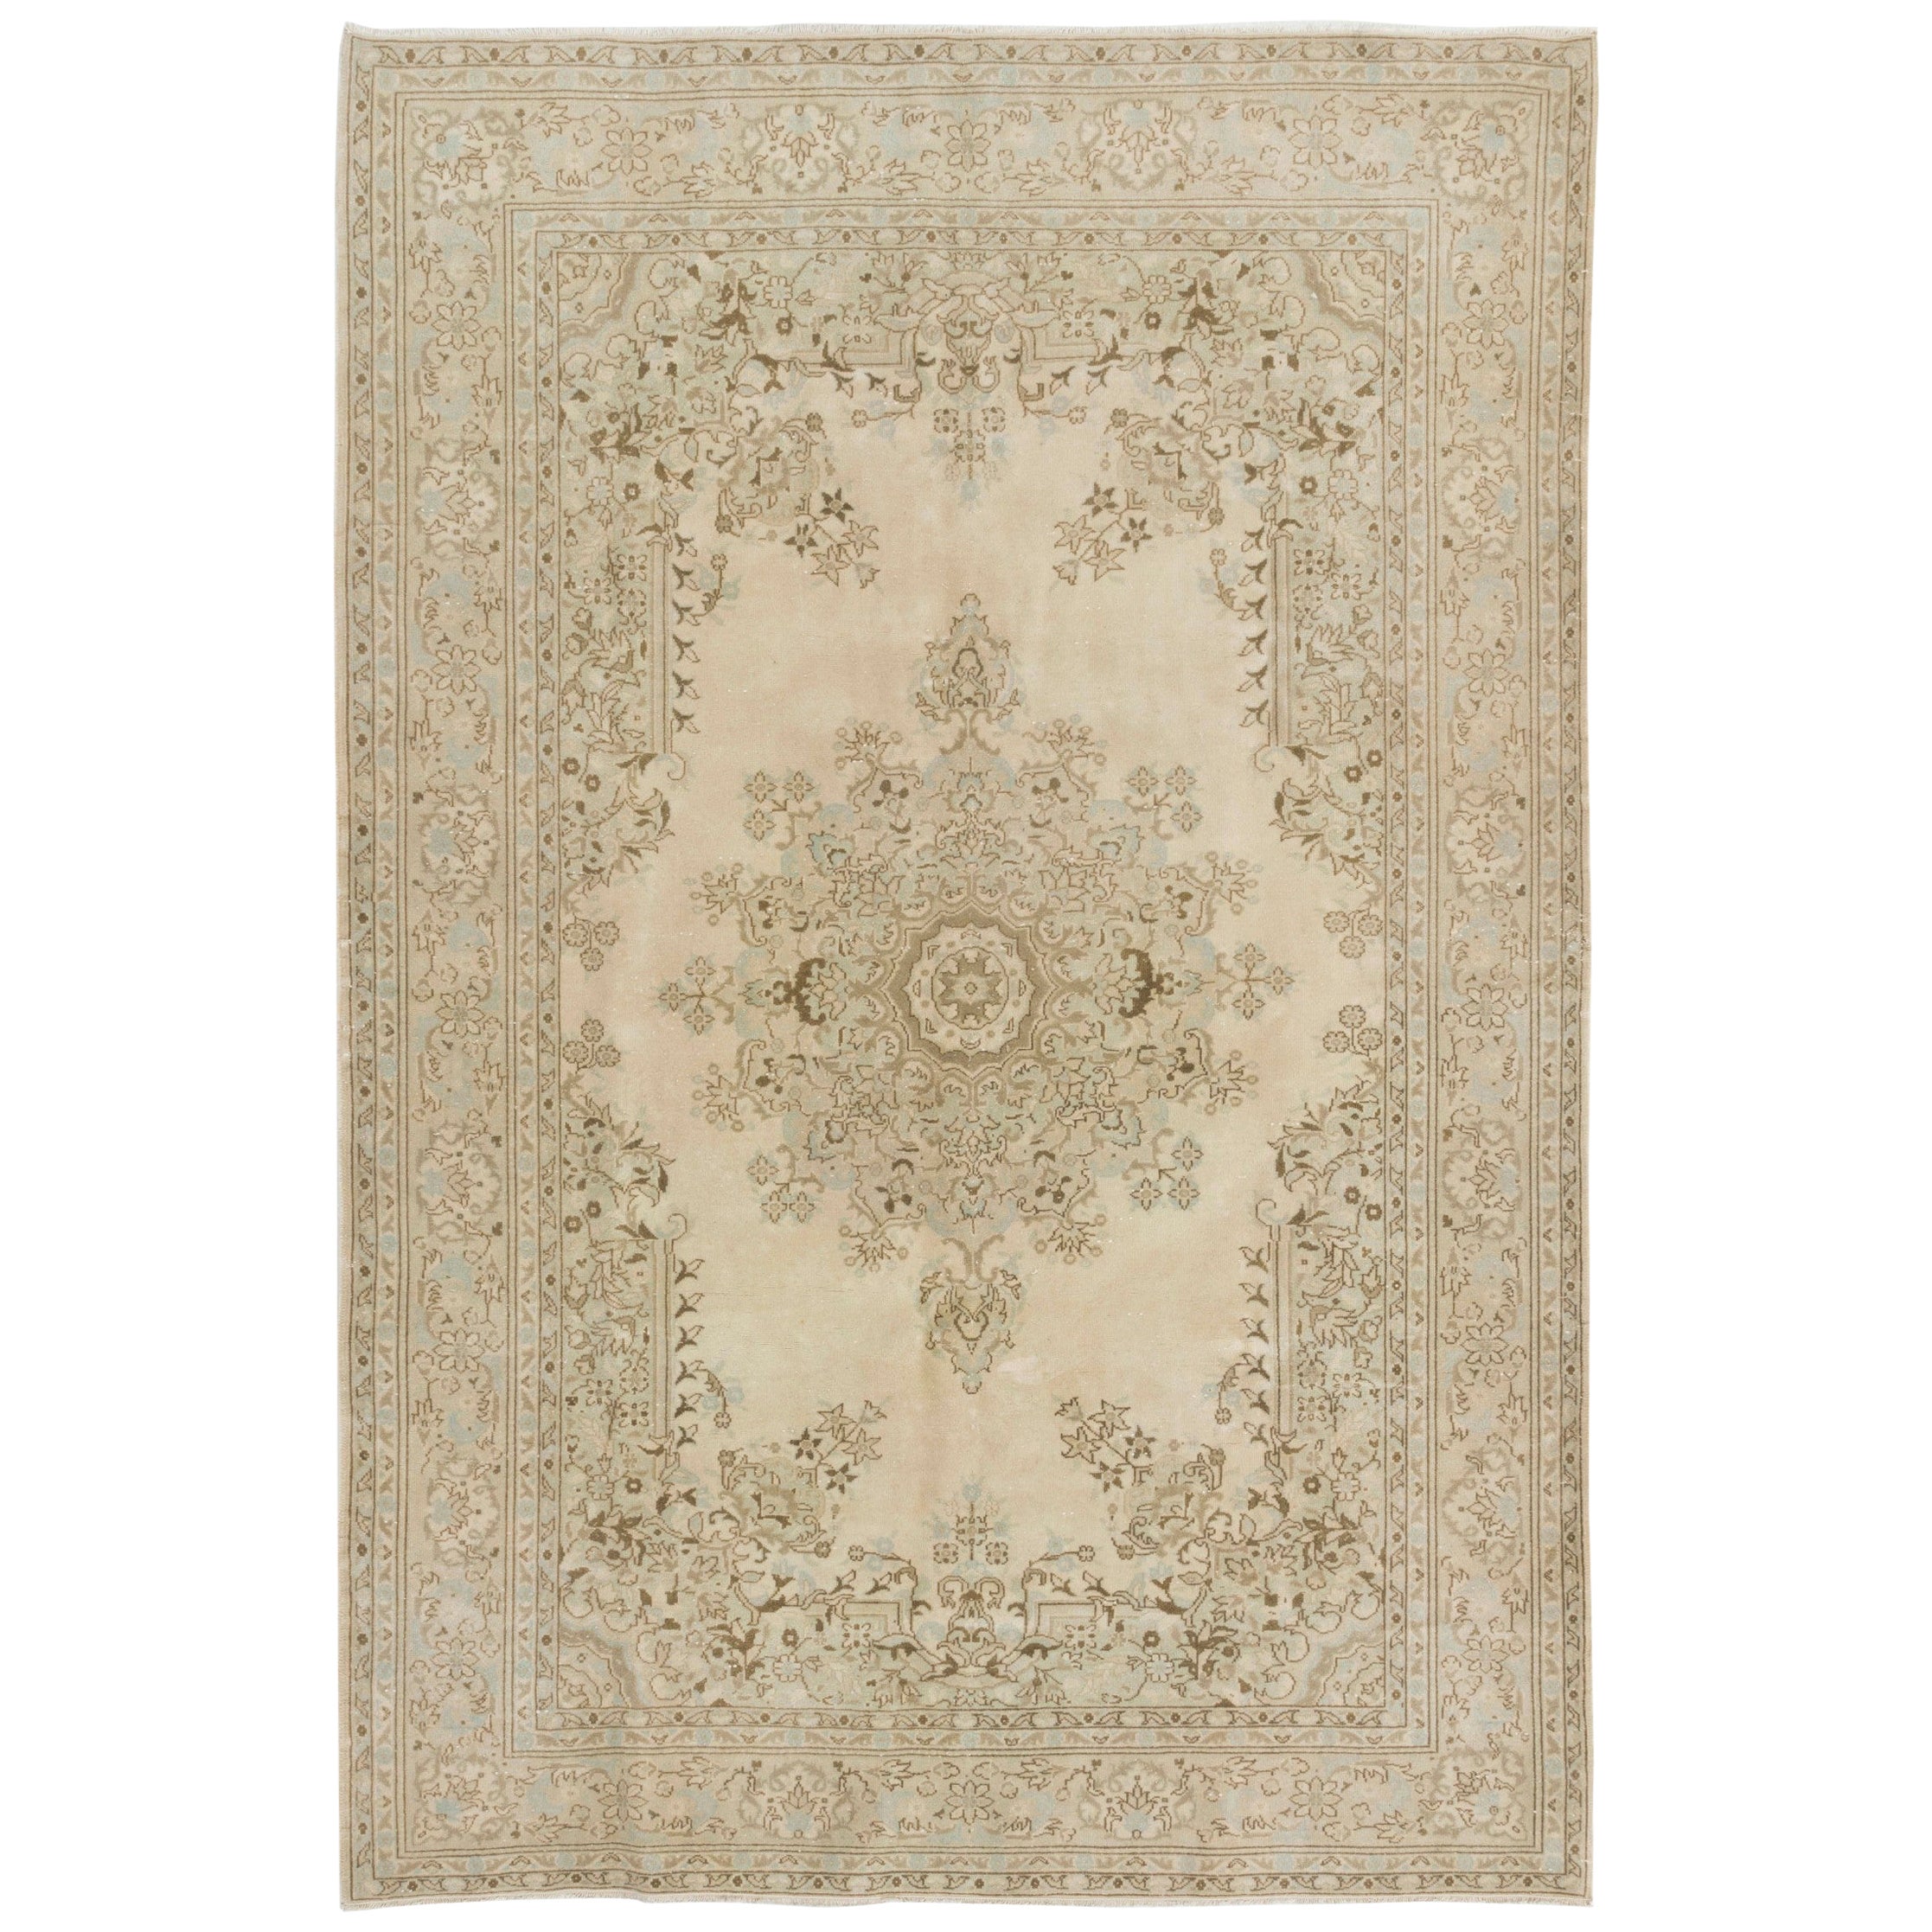 One-of-a-Kind Vintage Handmade Turkish Oushak Wool Rug in Cream, Gray